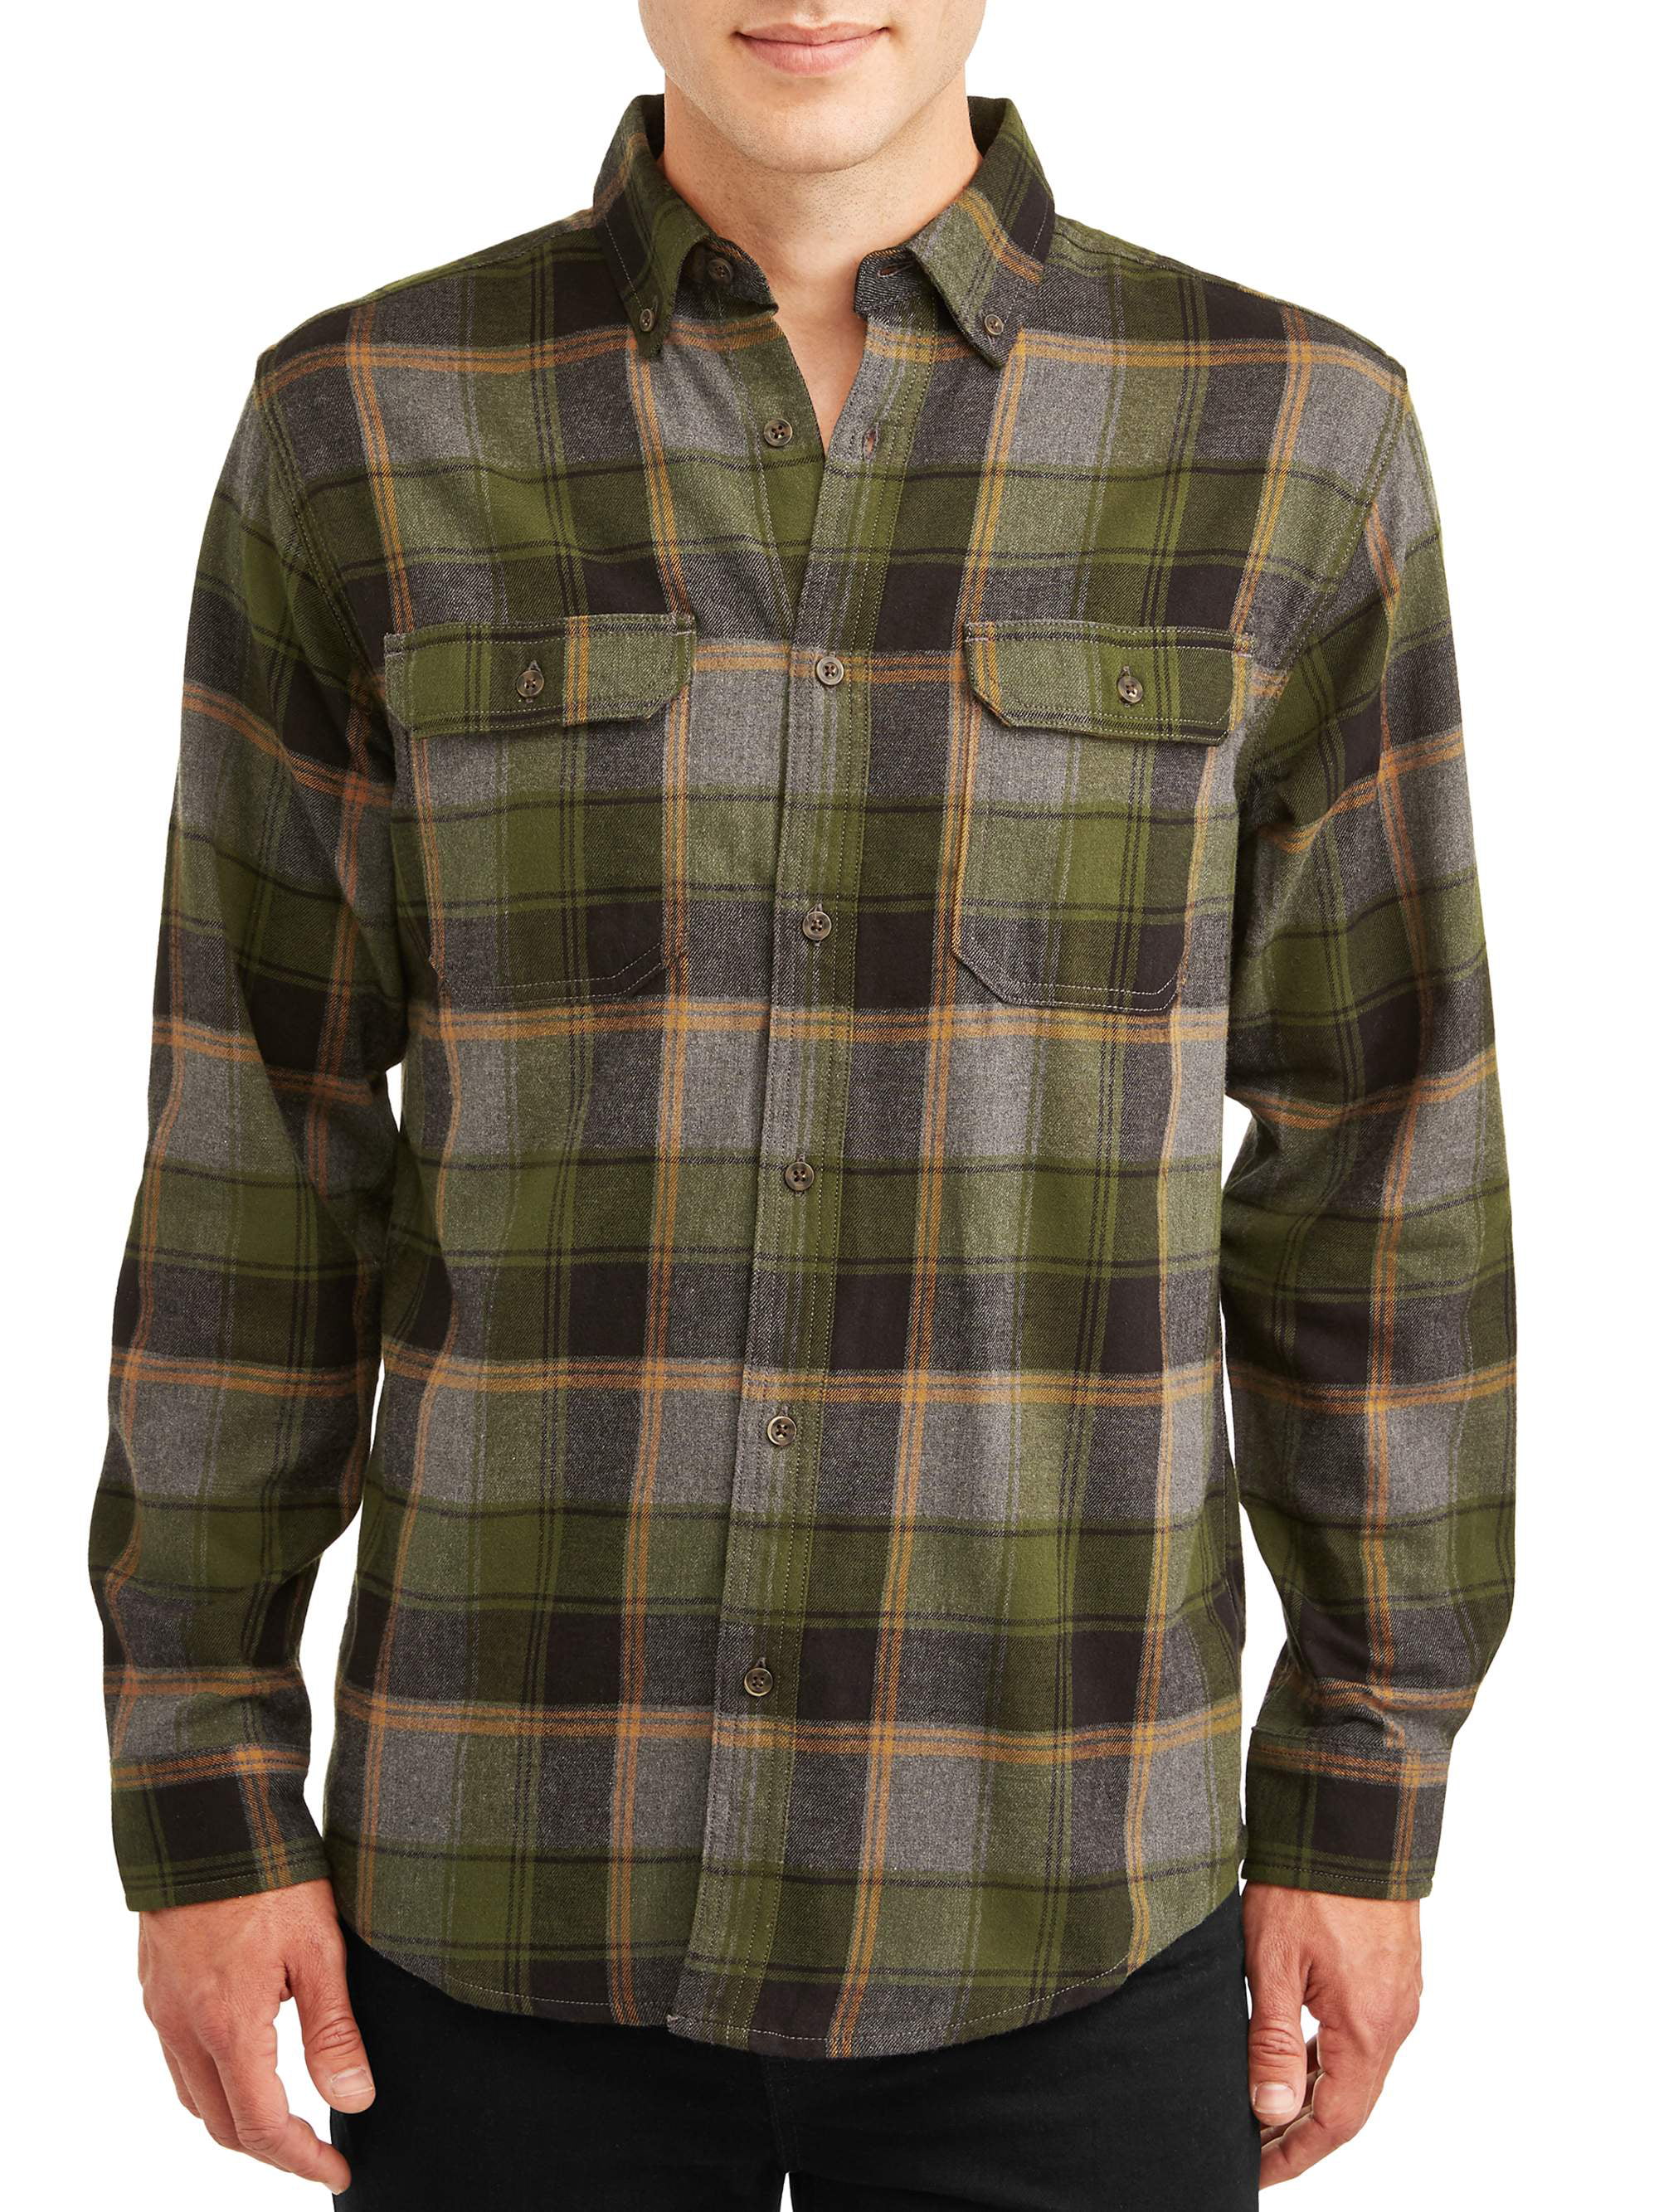 George Men's and Big Men's Long Sleeve Super Soft Flannel Shirt, up to ...